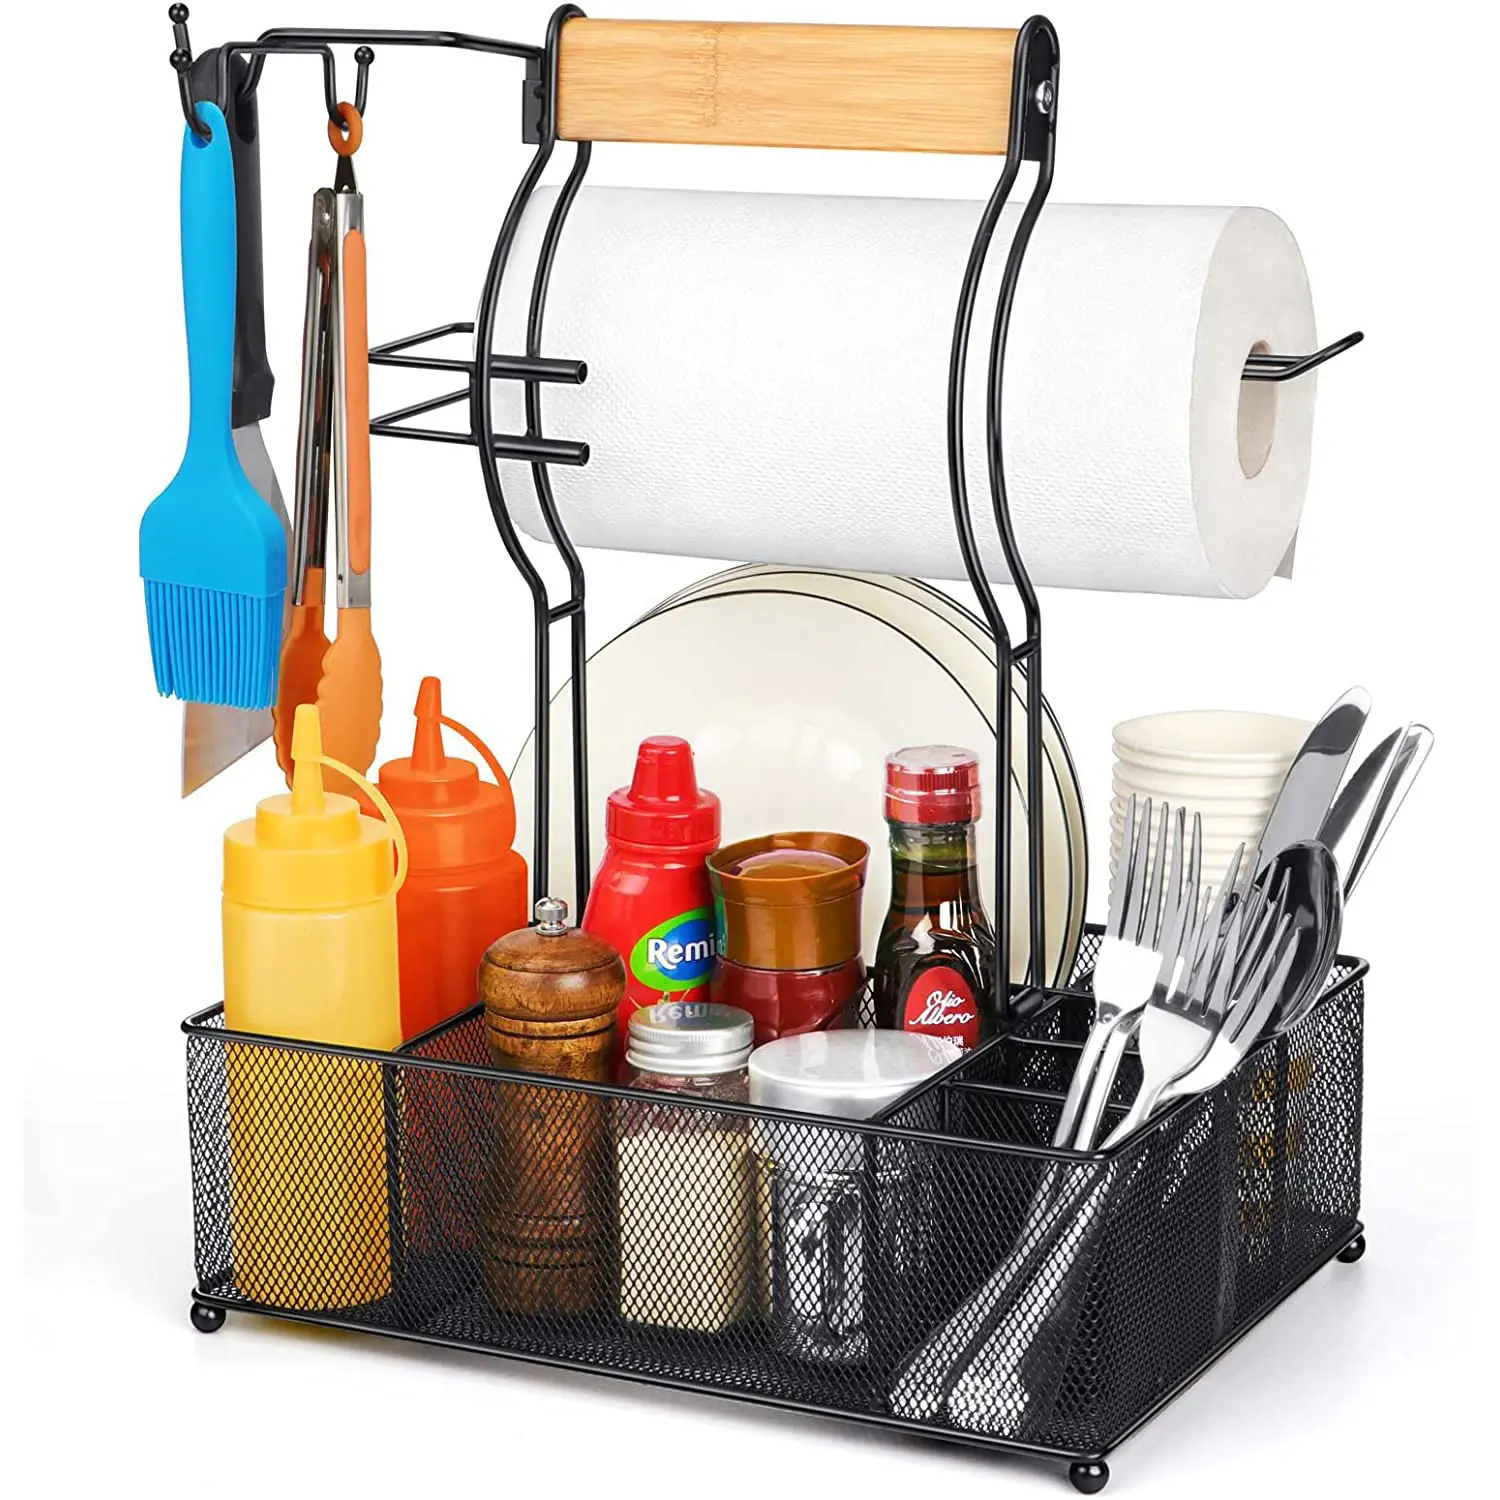 Outdoor Picnic Grill Utensil Caddy BBQ Organizer for Outdoor Grilling Camping Caddy with Paper Towel Holder